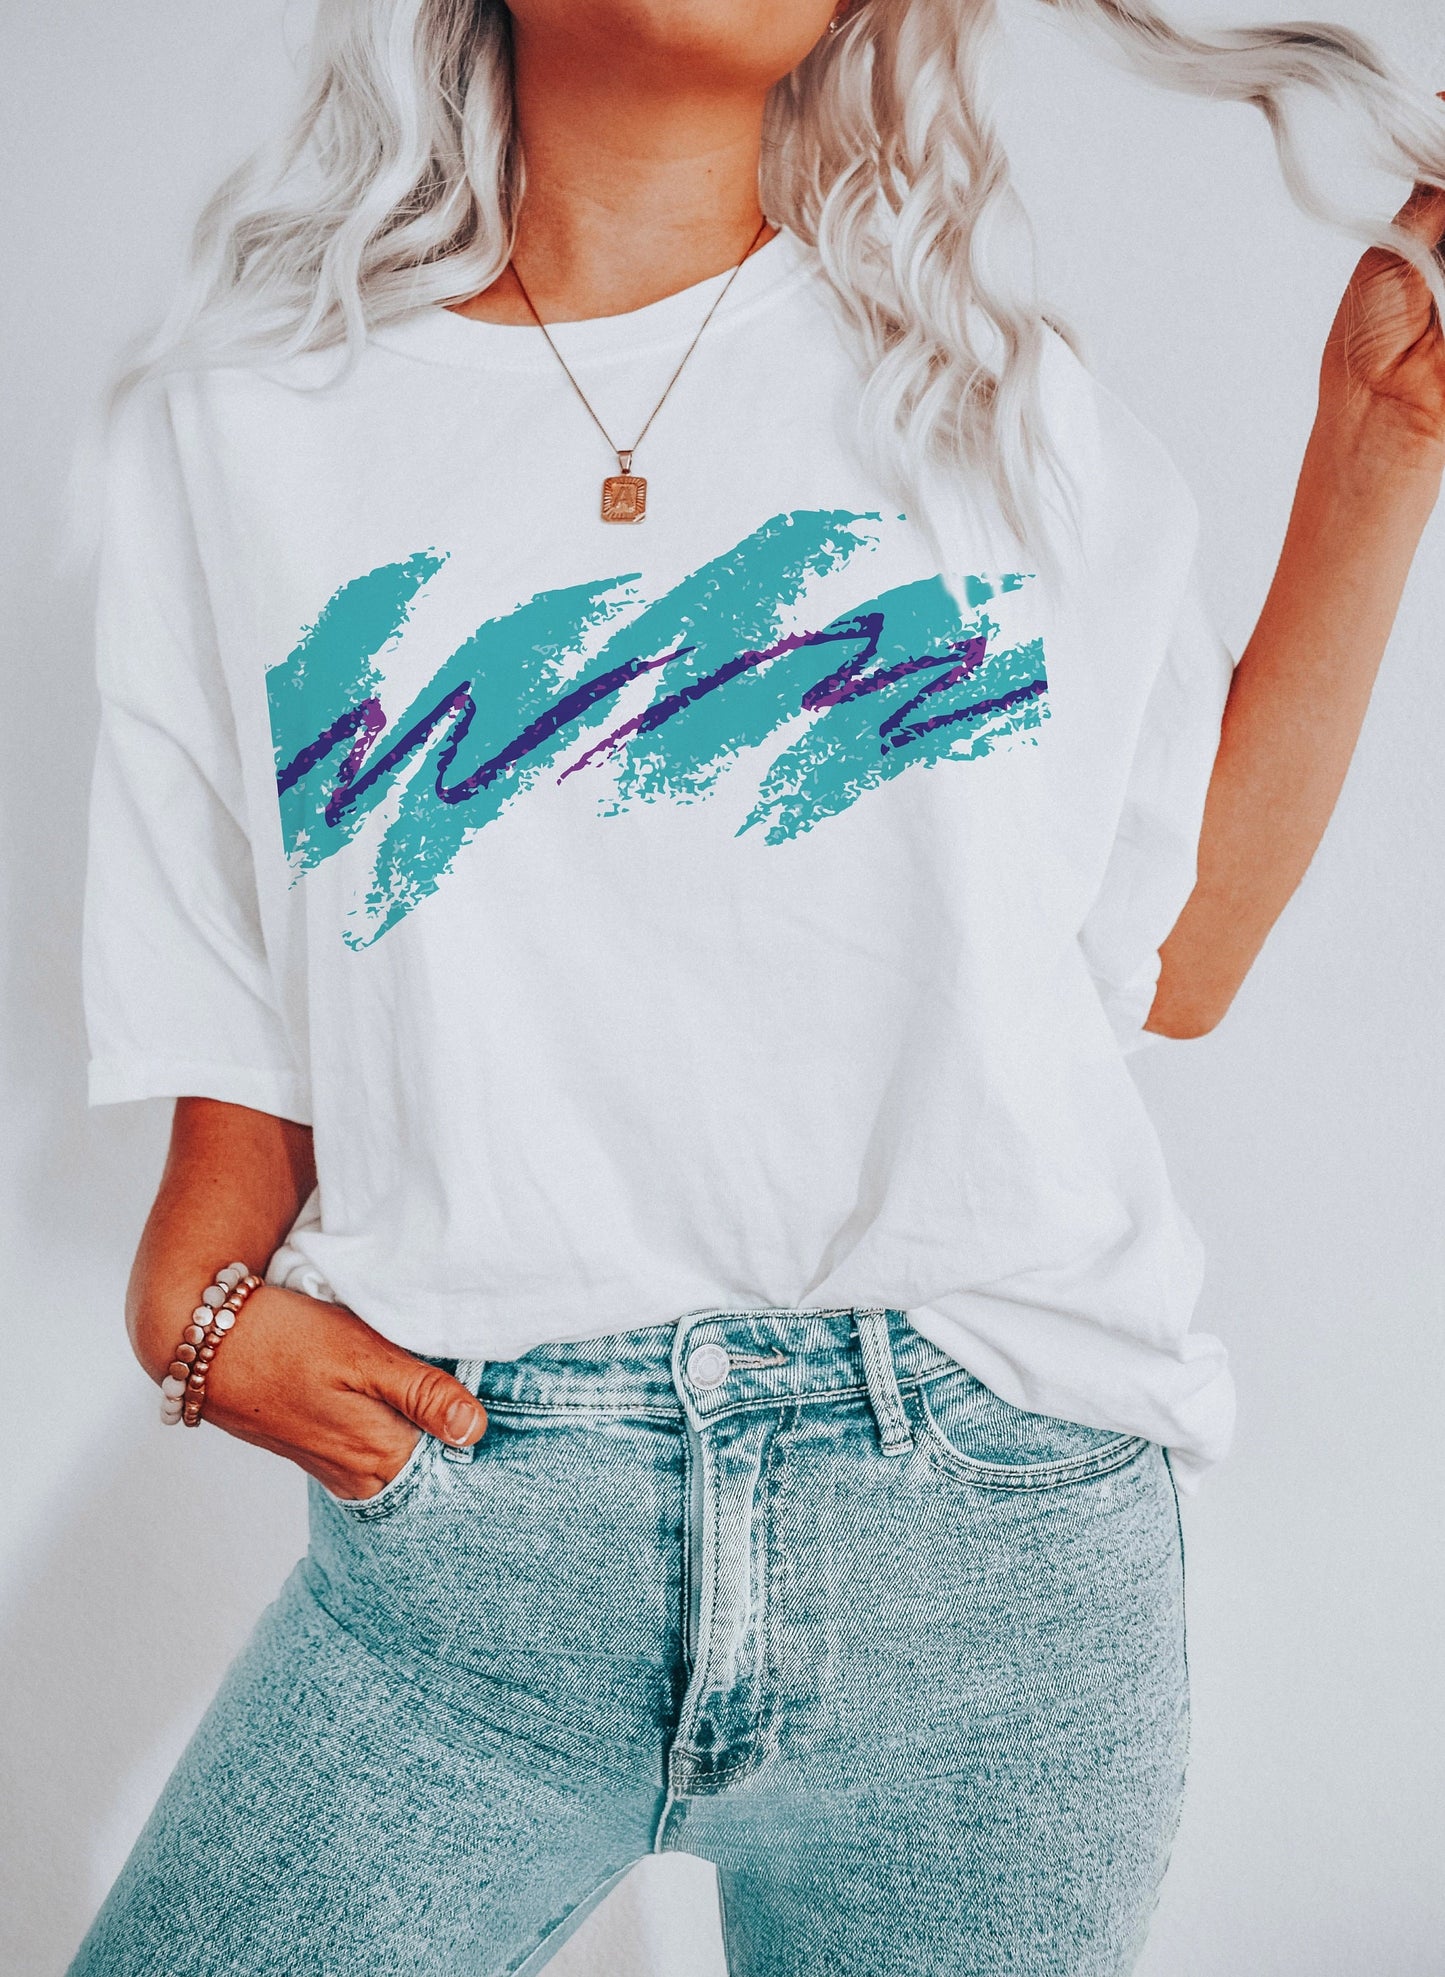 Vintage 80's 90's Paper-ware Paper Cup Design Funny Nostalgia Tee Ultra Soft Graphic Tee Unisex Soft Tee T-shirt for Women or Men